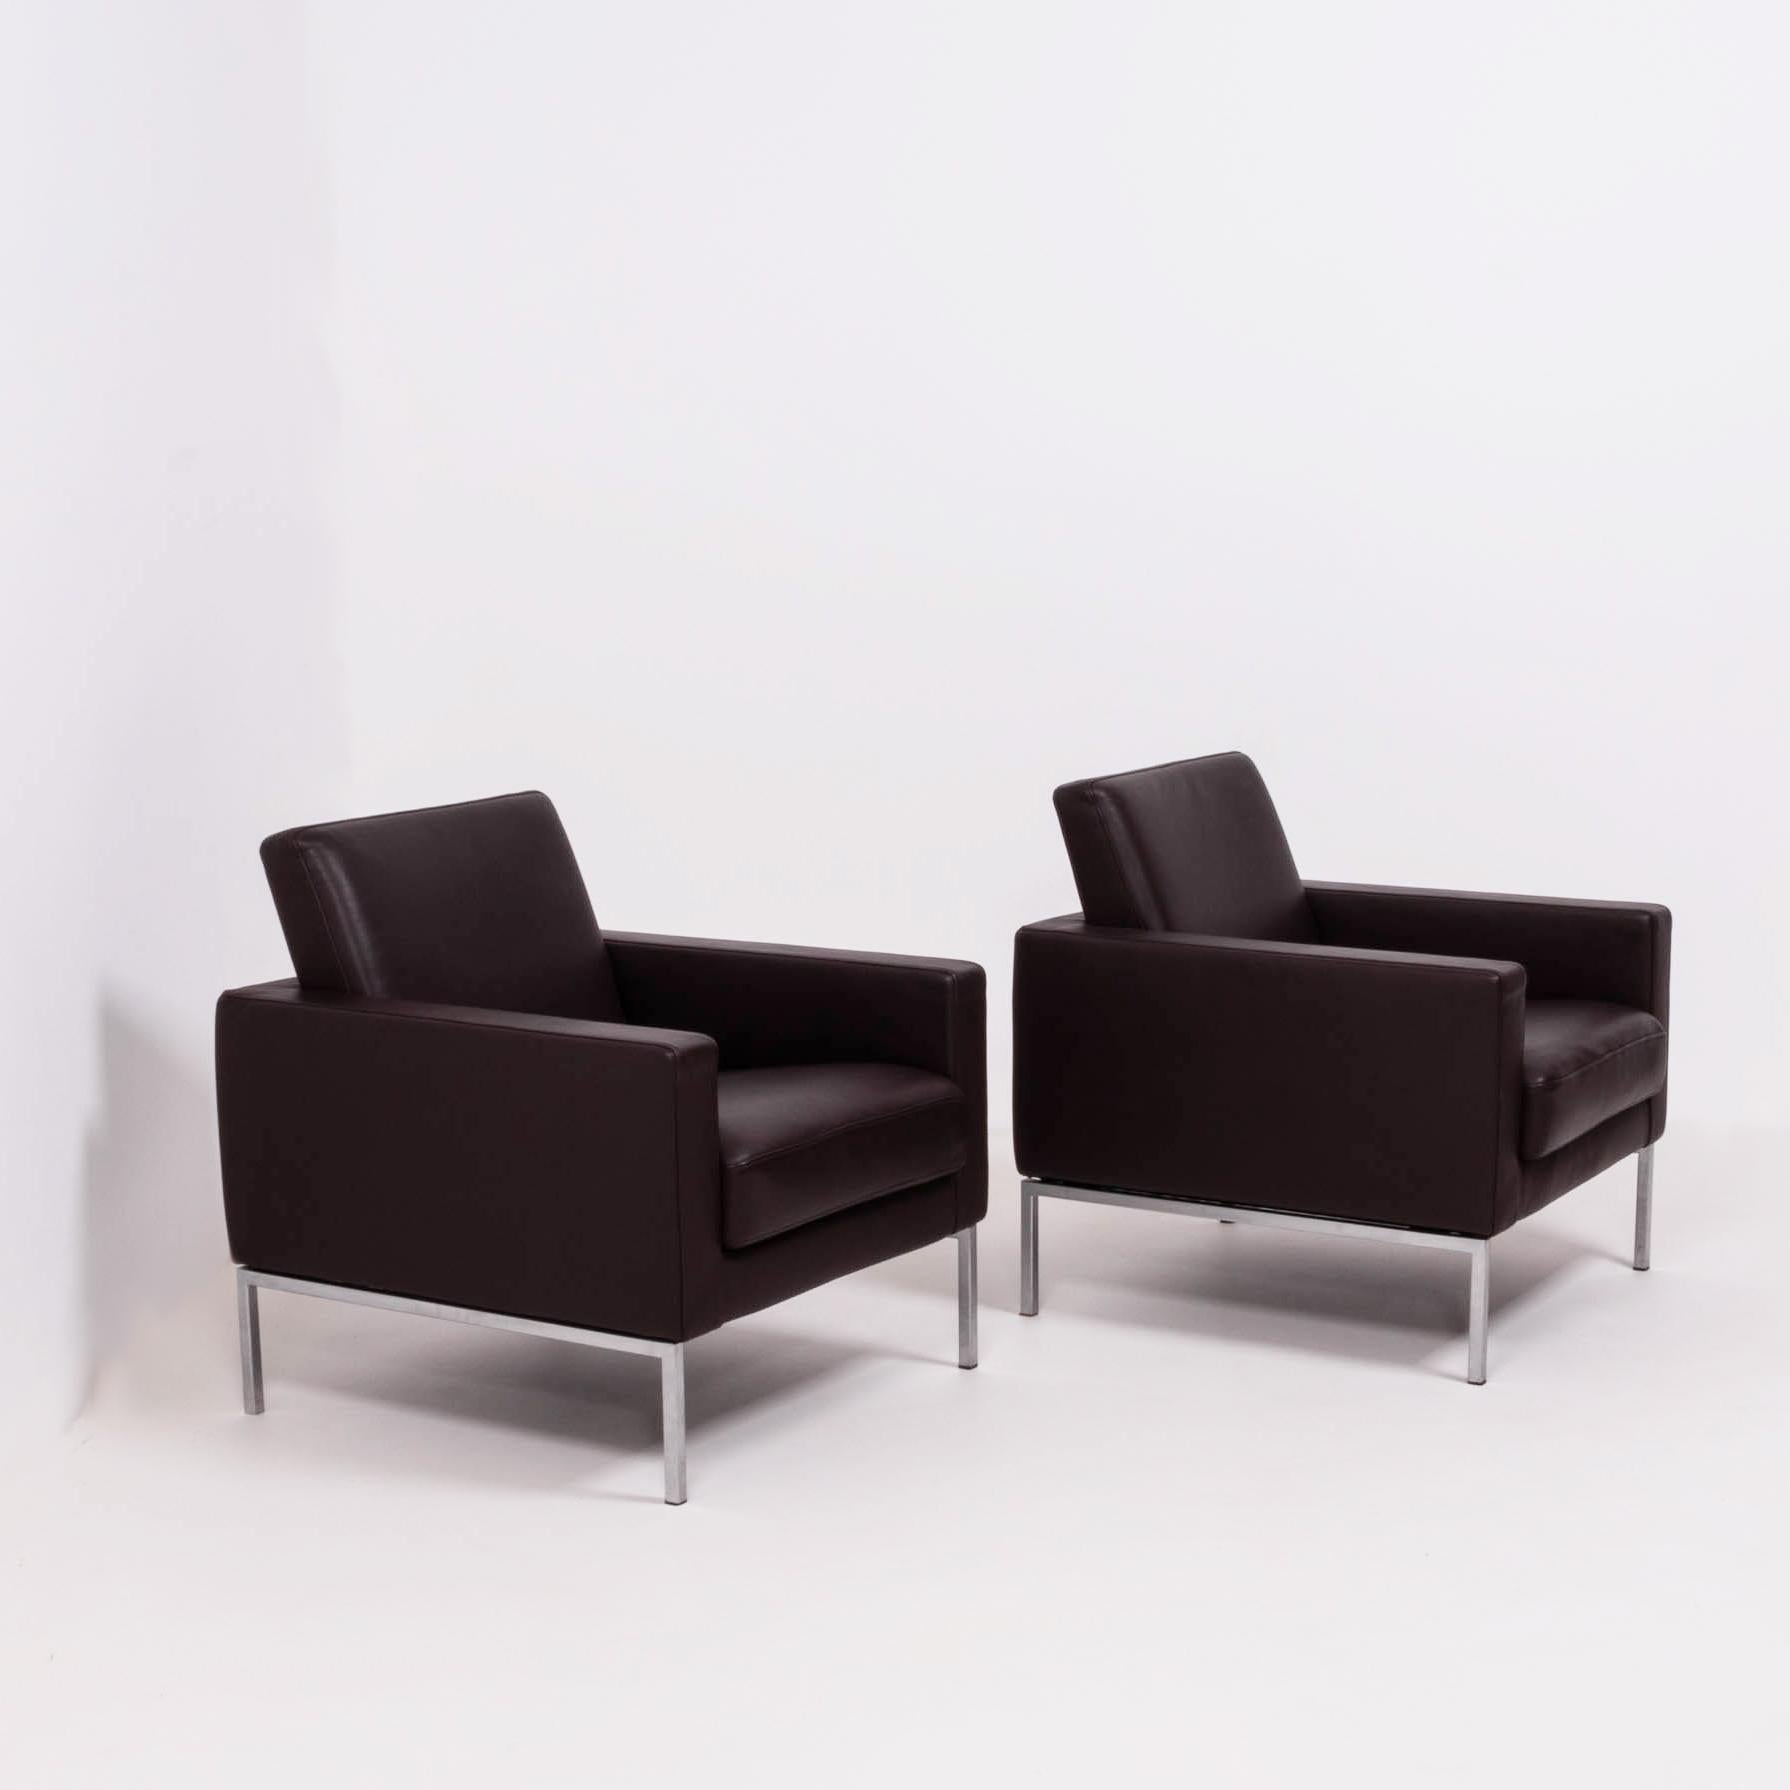 Sleek and simple, this pair of Walter Knoll armchairs have a Classic silhouette.

Featuring slim chrome frames and soft brown leather upholstery, the chairs balance a sharp aesthetic with deep, comfortable seating.

These chairs would make the